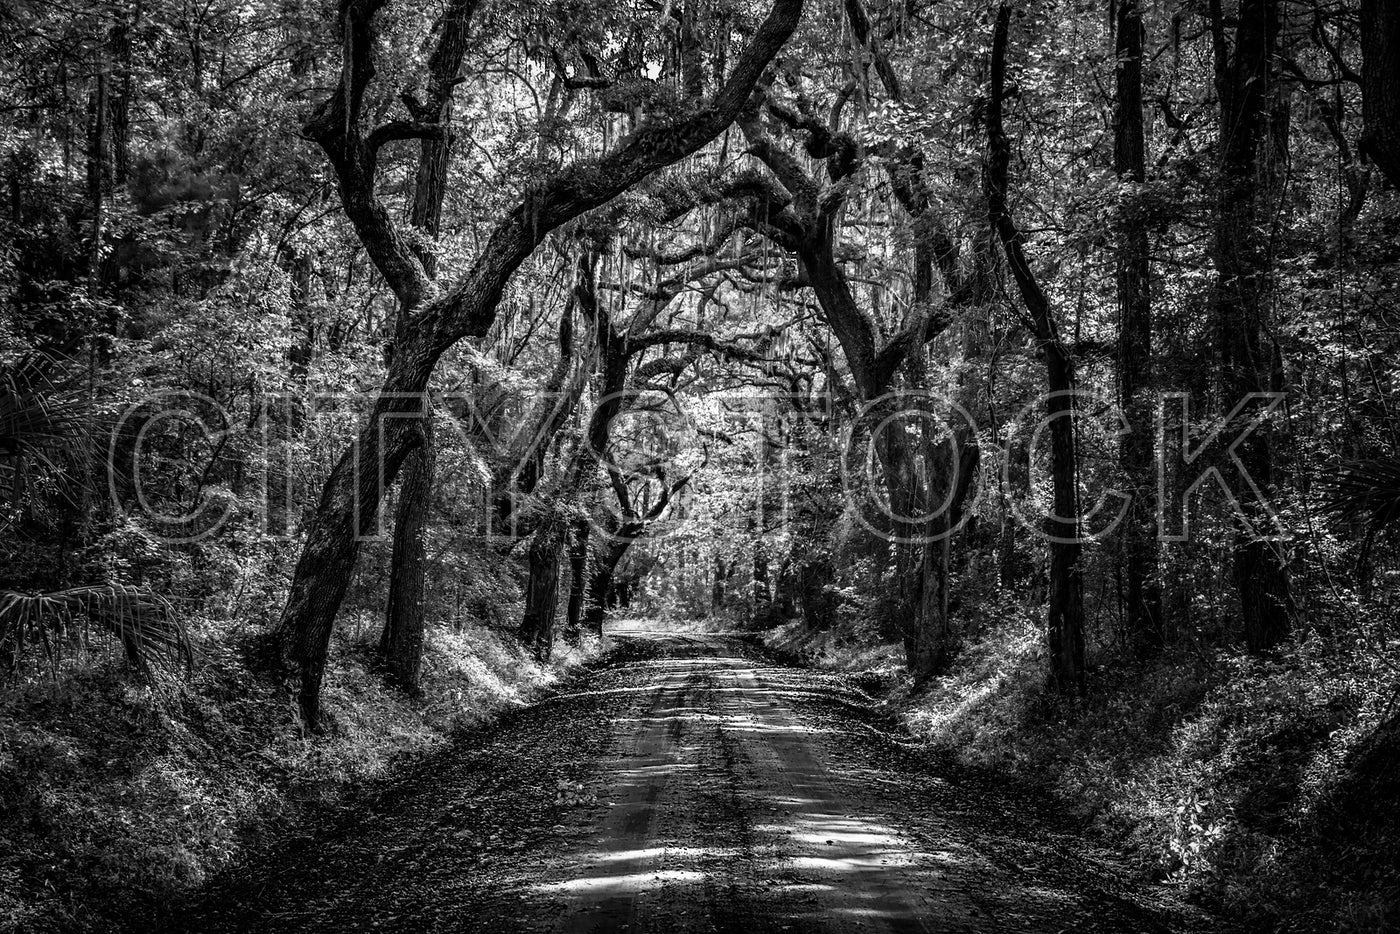 Moss-draped trees arching over a tranquil forest road, South Carolina